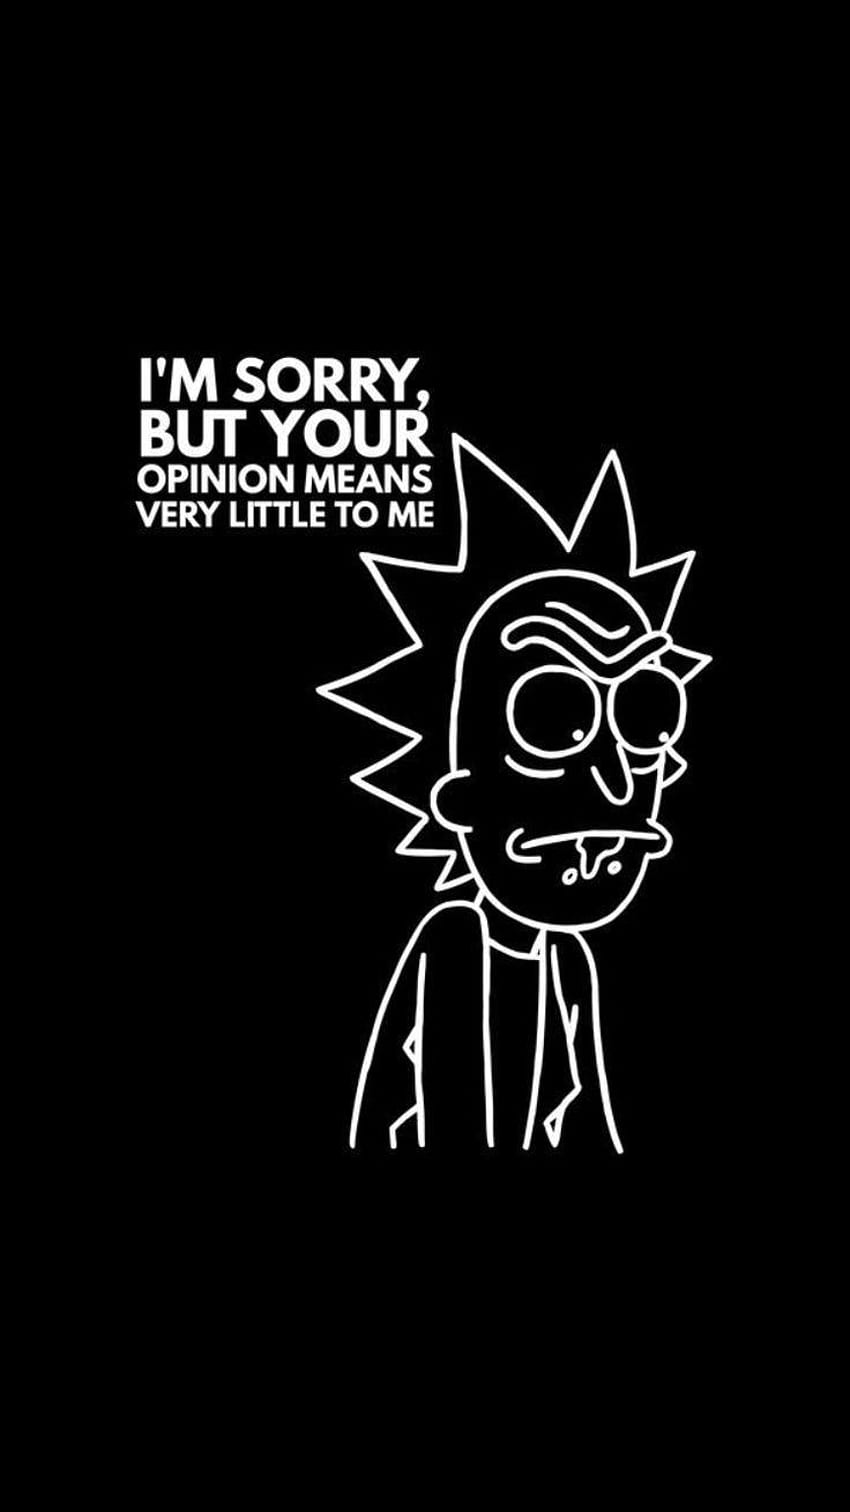 Rick And Morty Quote Android, Rick Sanchez Quotes HD 전화 배경 화면